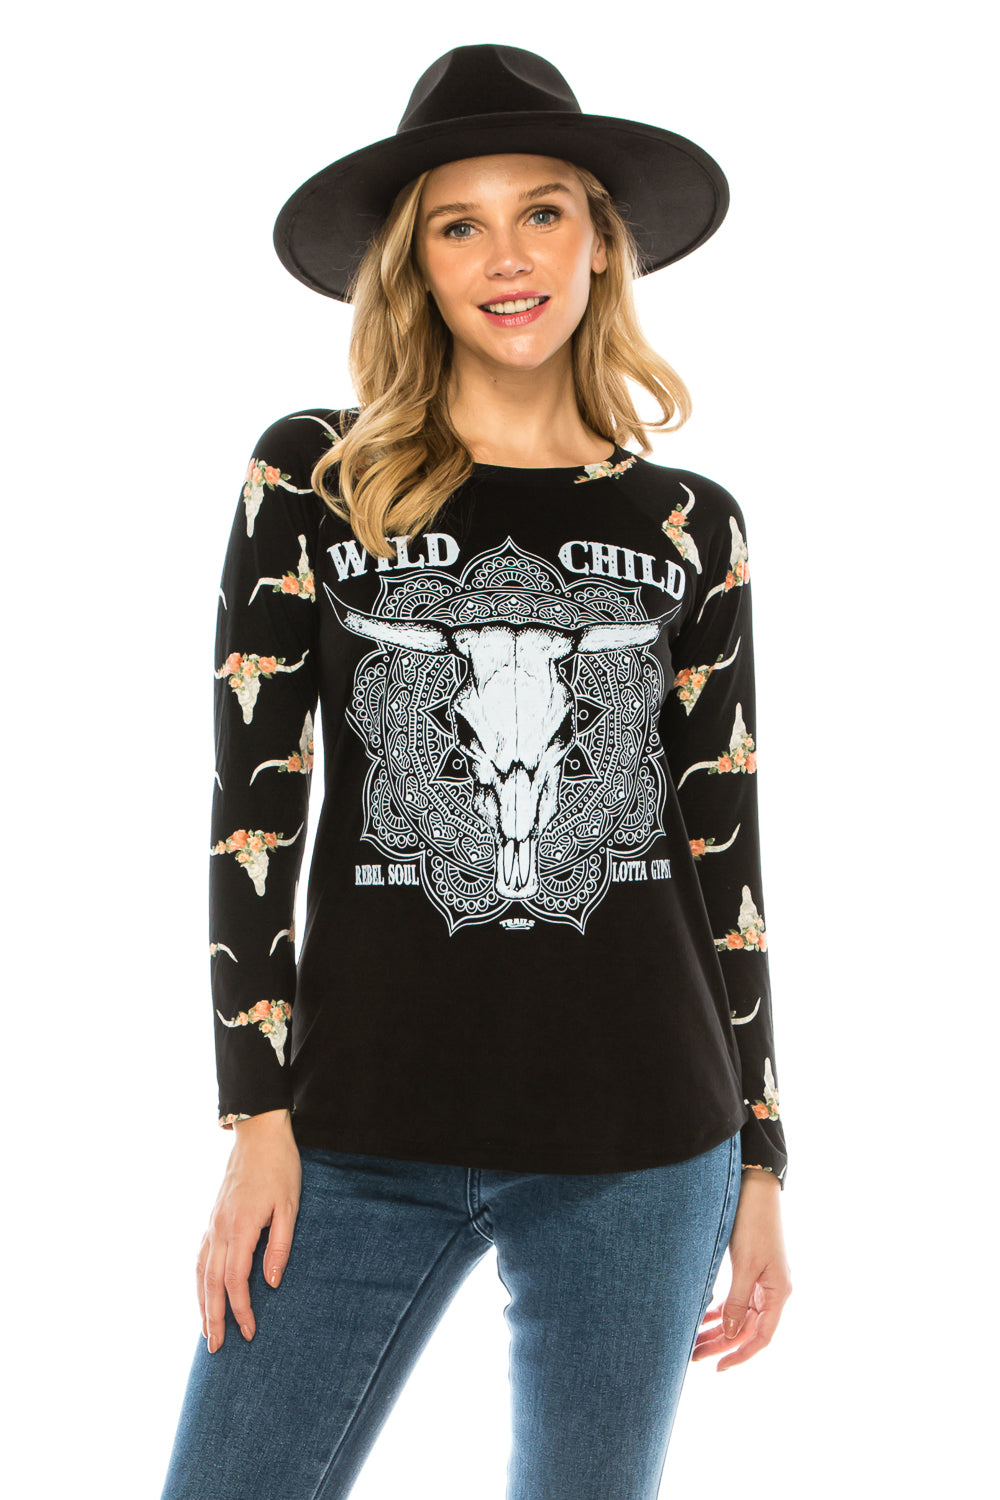 WILD CHILD LONG SLEEVE TOP - Trailsclothing.com